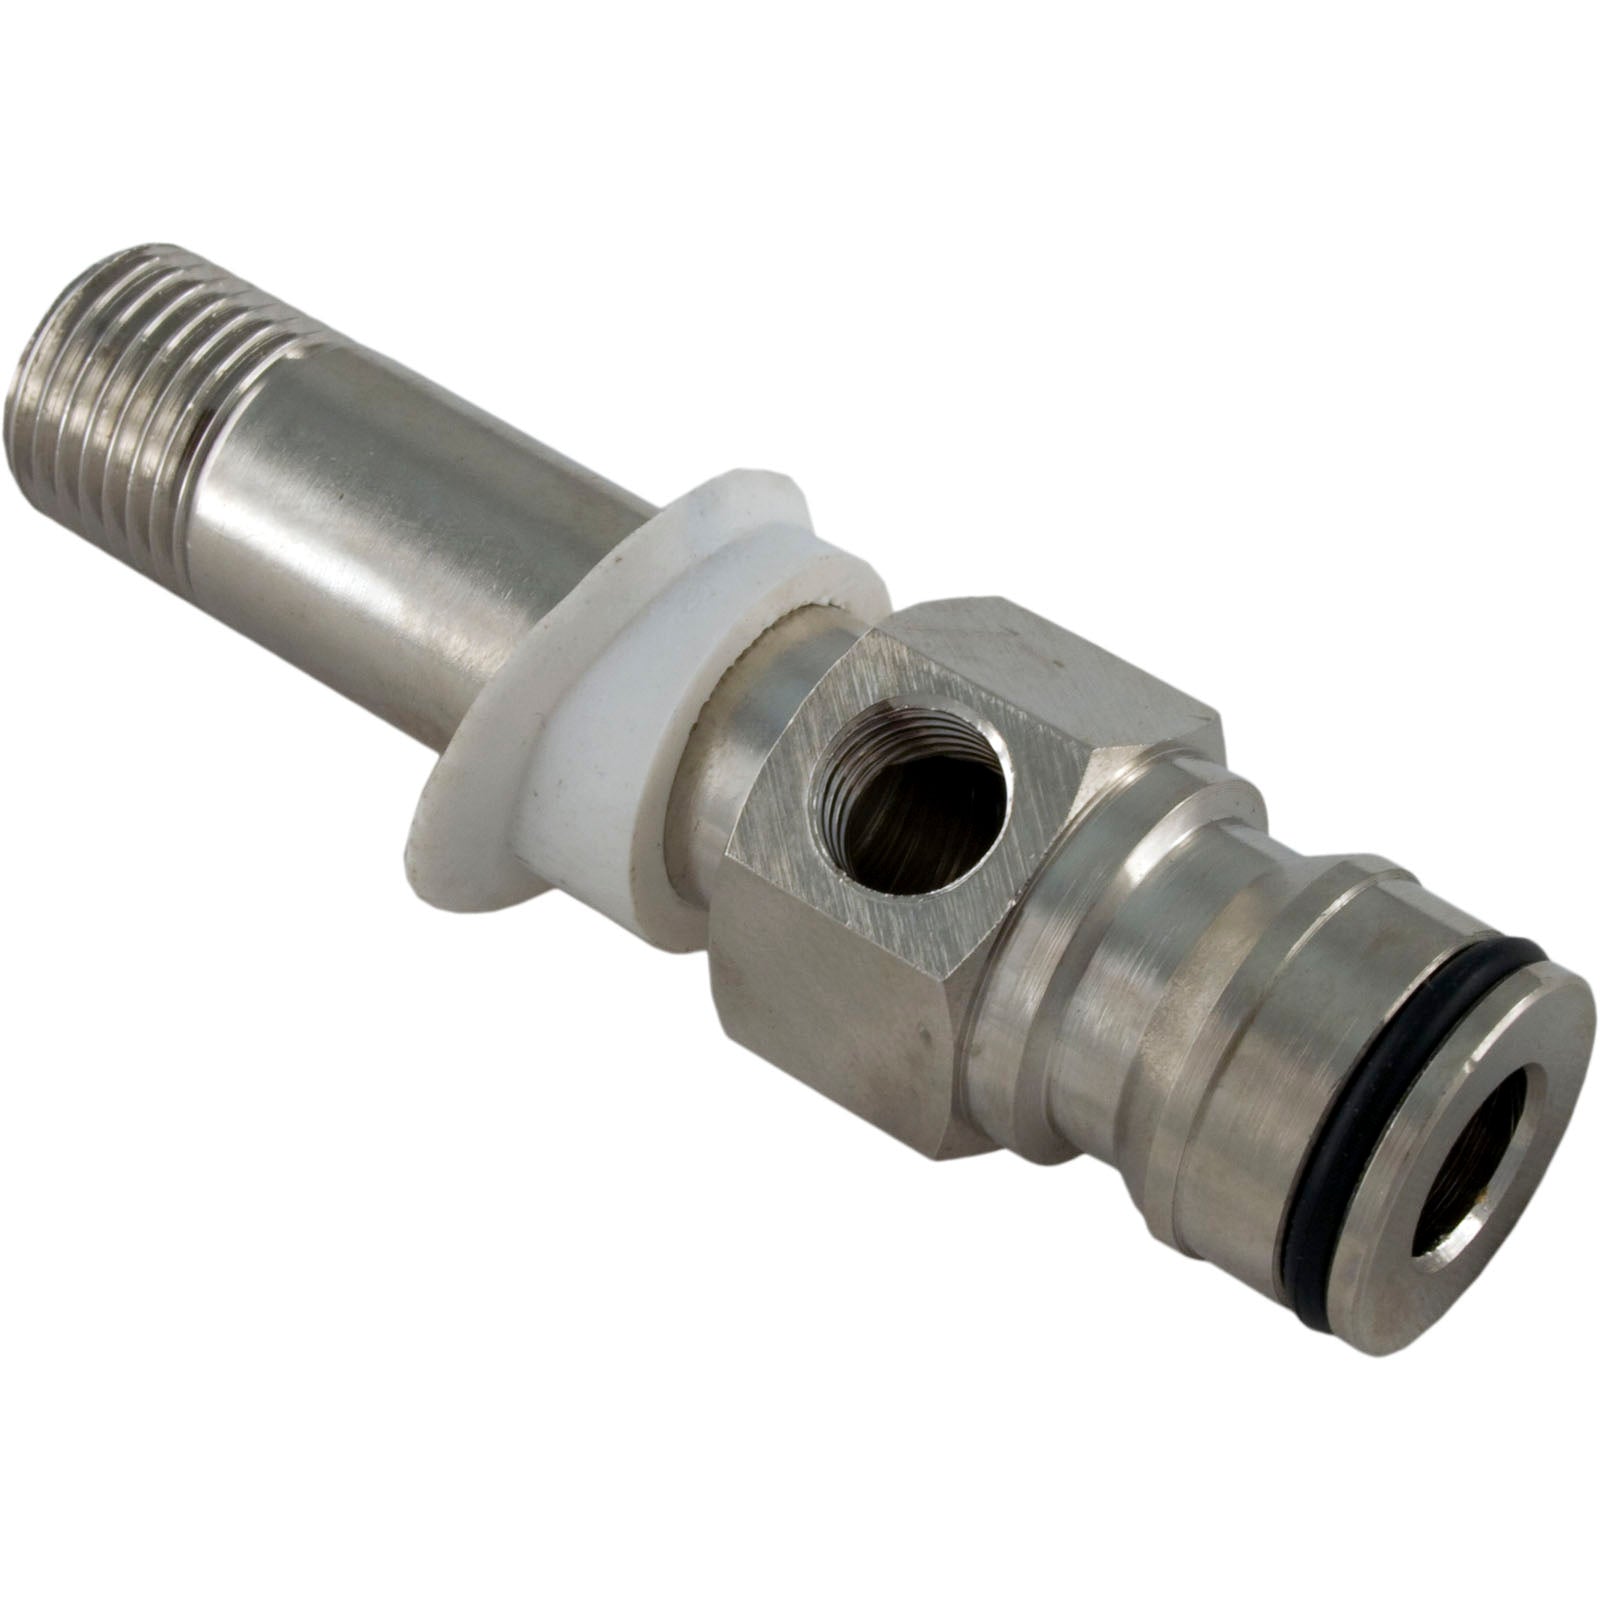 Connecter, Pentair Letro L78BL Cleaner, Wall Hose- LG13